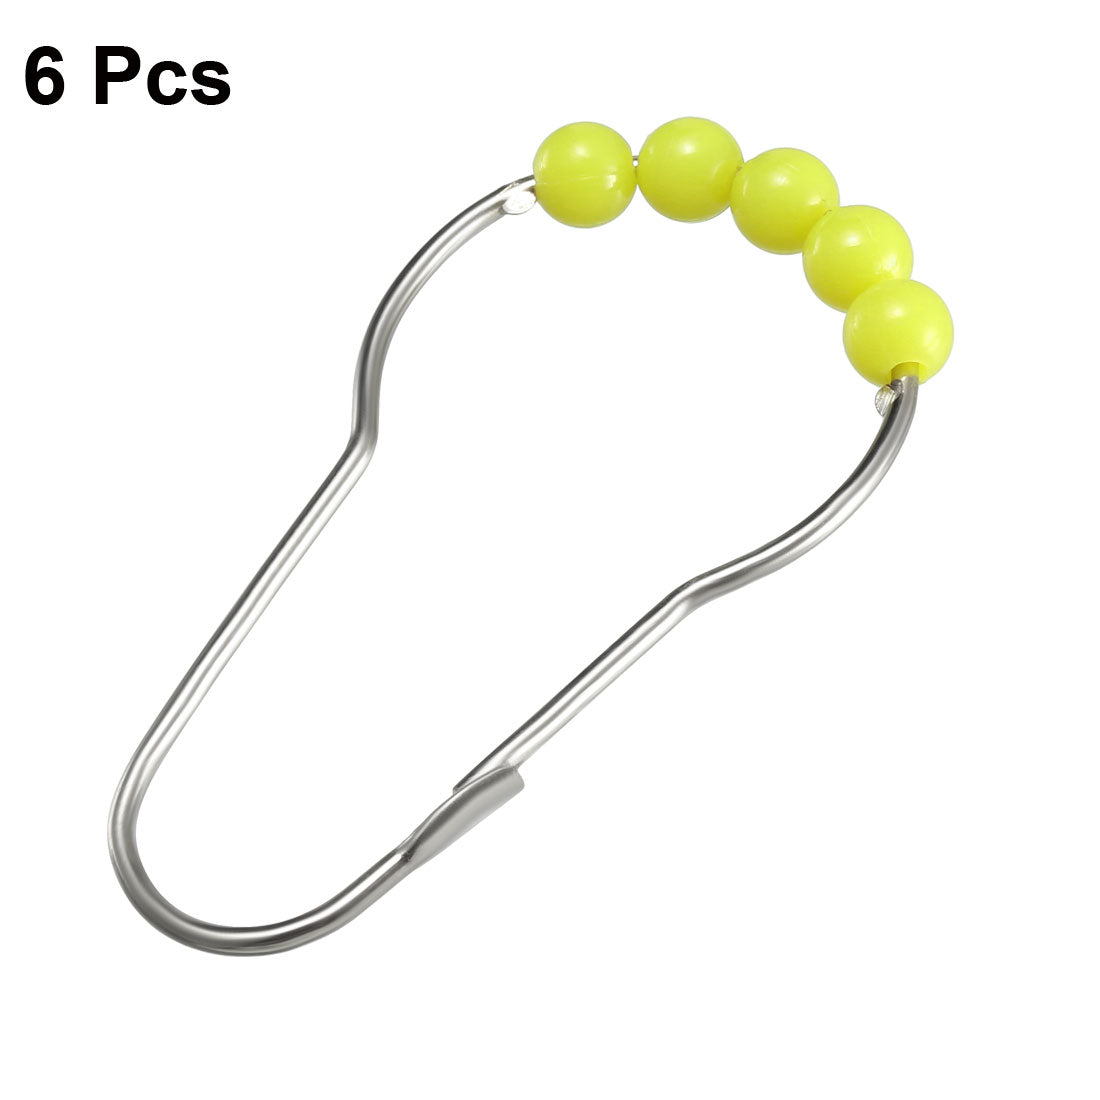 uxcell Uxcell Shower Curtain Ring Hooks Metal for Bathroom Shower Rods Curtains Liners Yellow Ball 6 Pcs